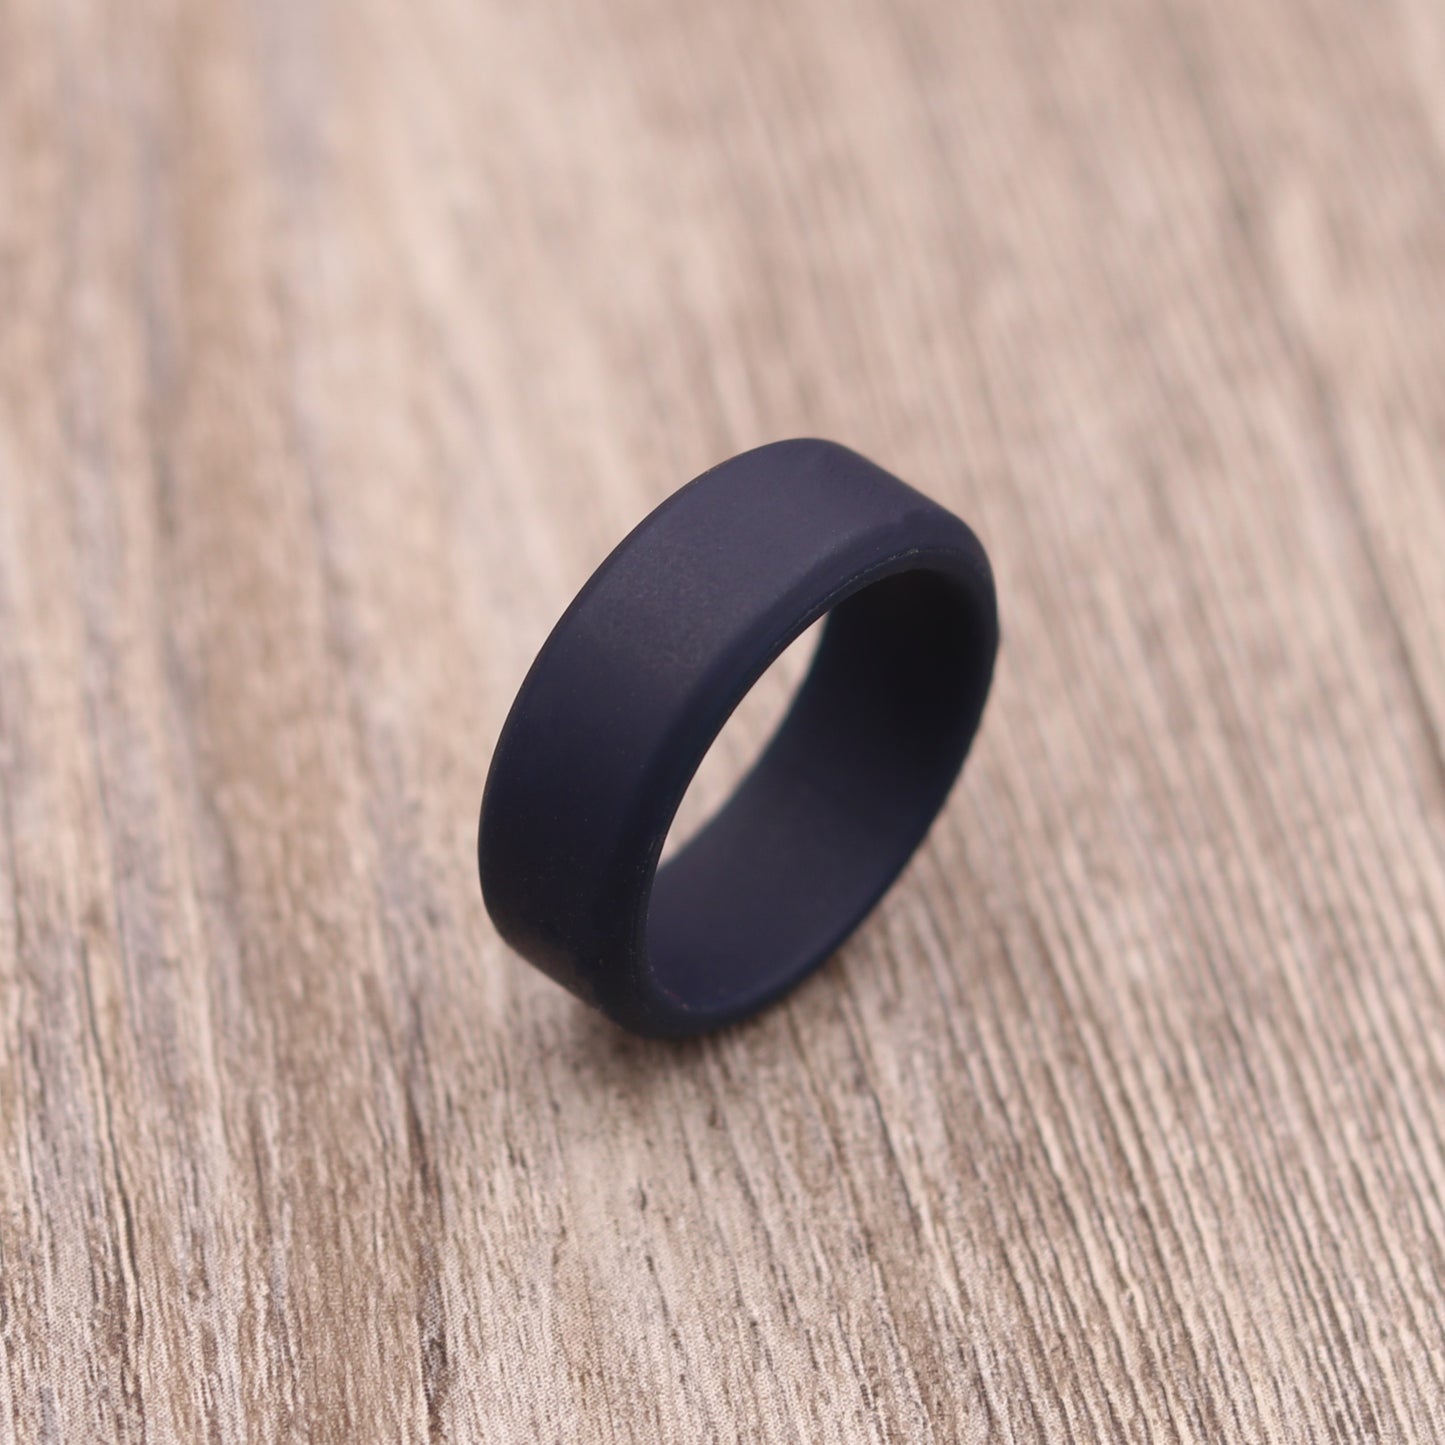 8MM Beveled Edge Silicone Ring - PLAIN/NON-PERSONALIZED